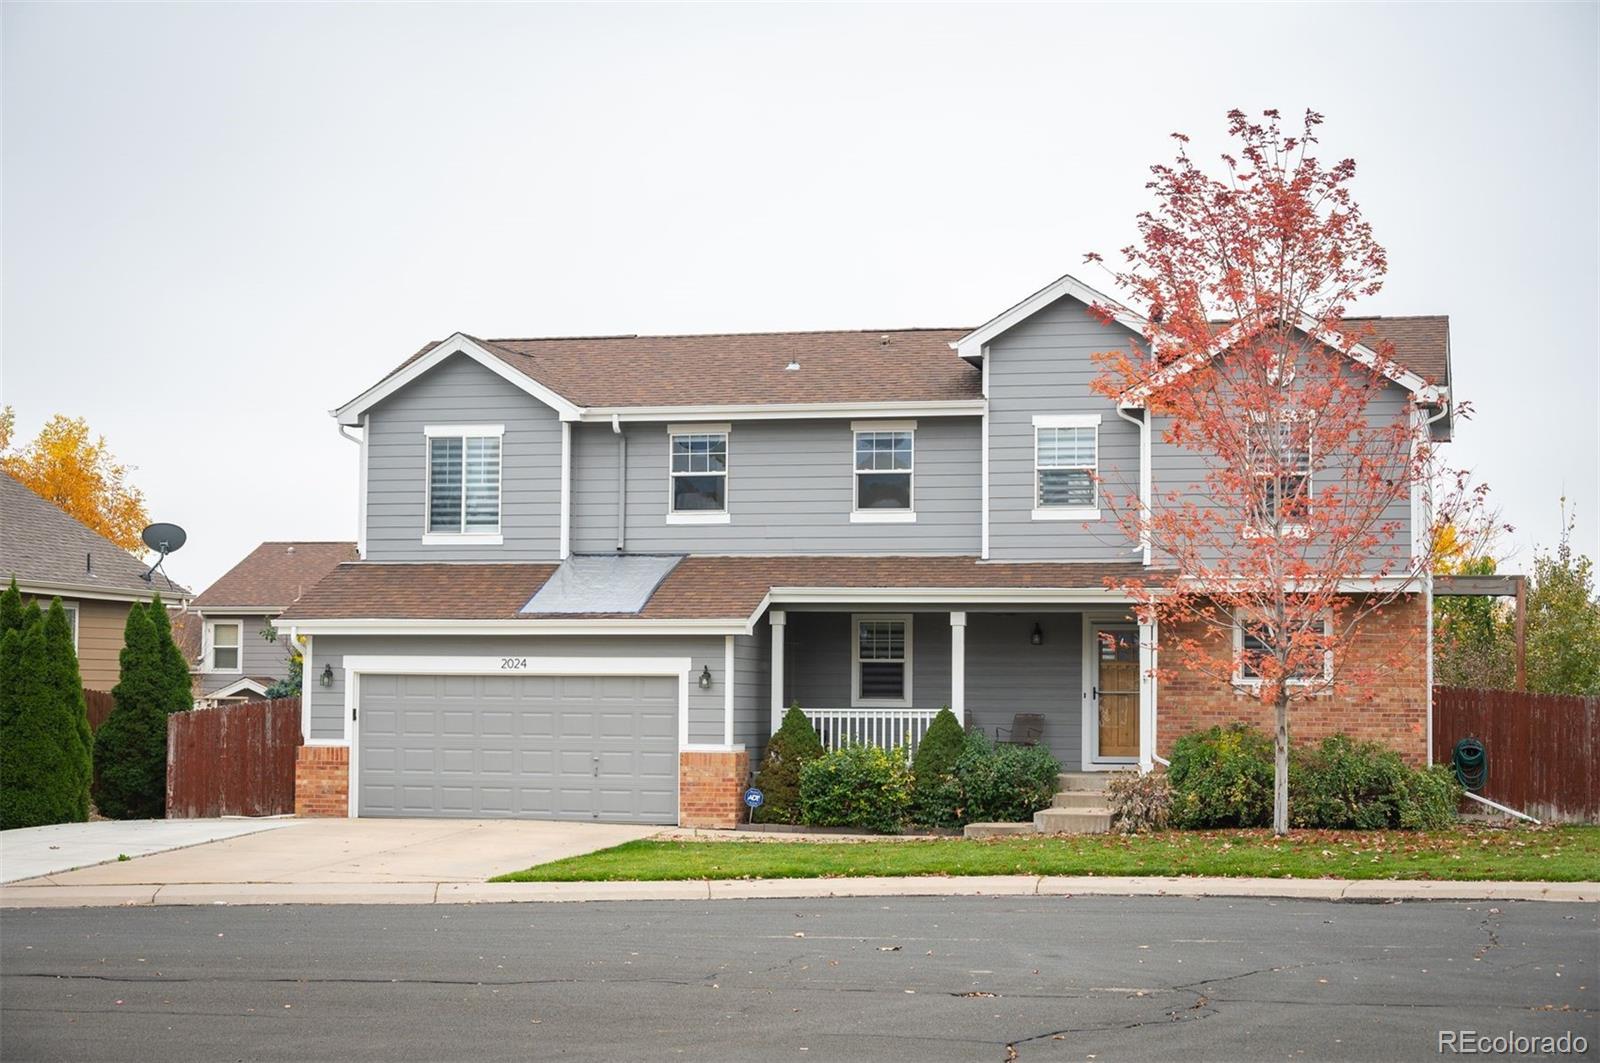 2024 E 98th Place, thornton MLS: 5229387 Beds: 4 Baths: 4 Price: $539,000